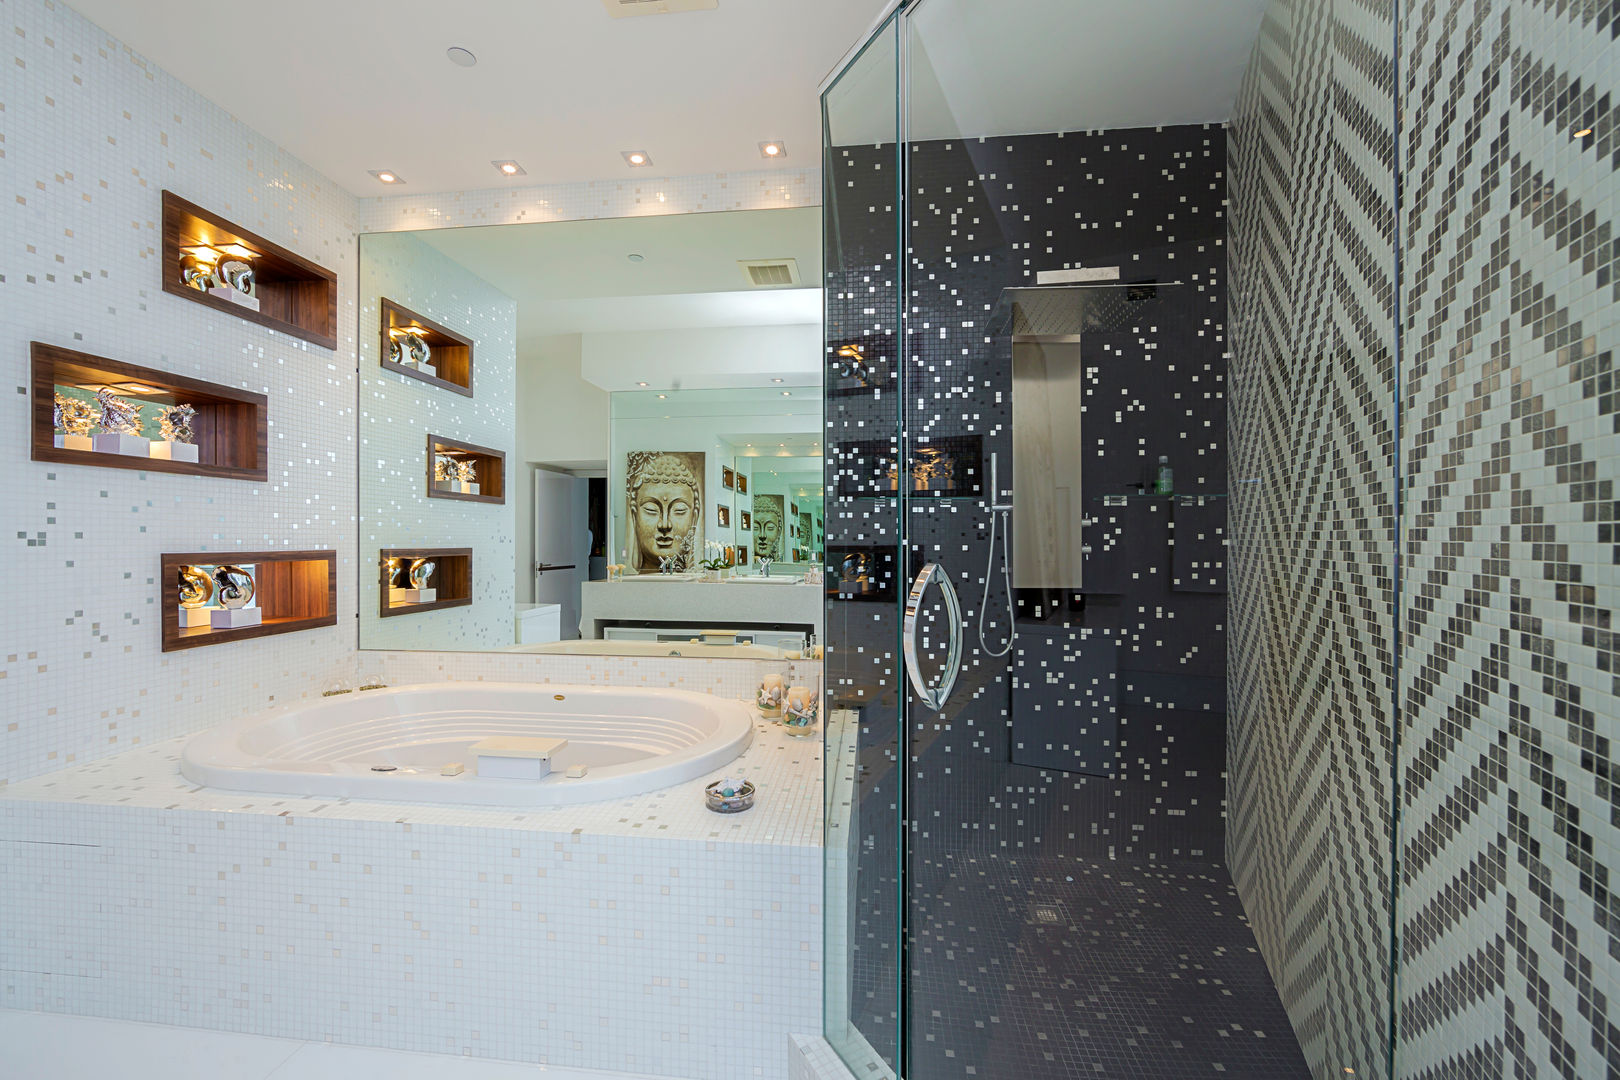 Sunny Isles - Florida - US, Infinity Spaces Infinity Spaces Bagno moderno